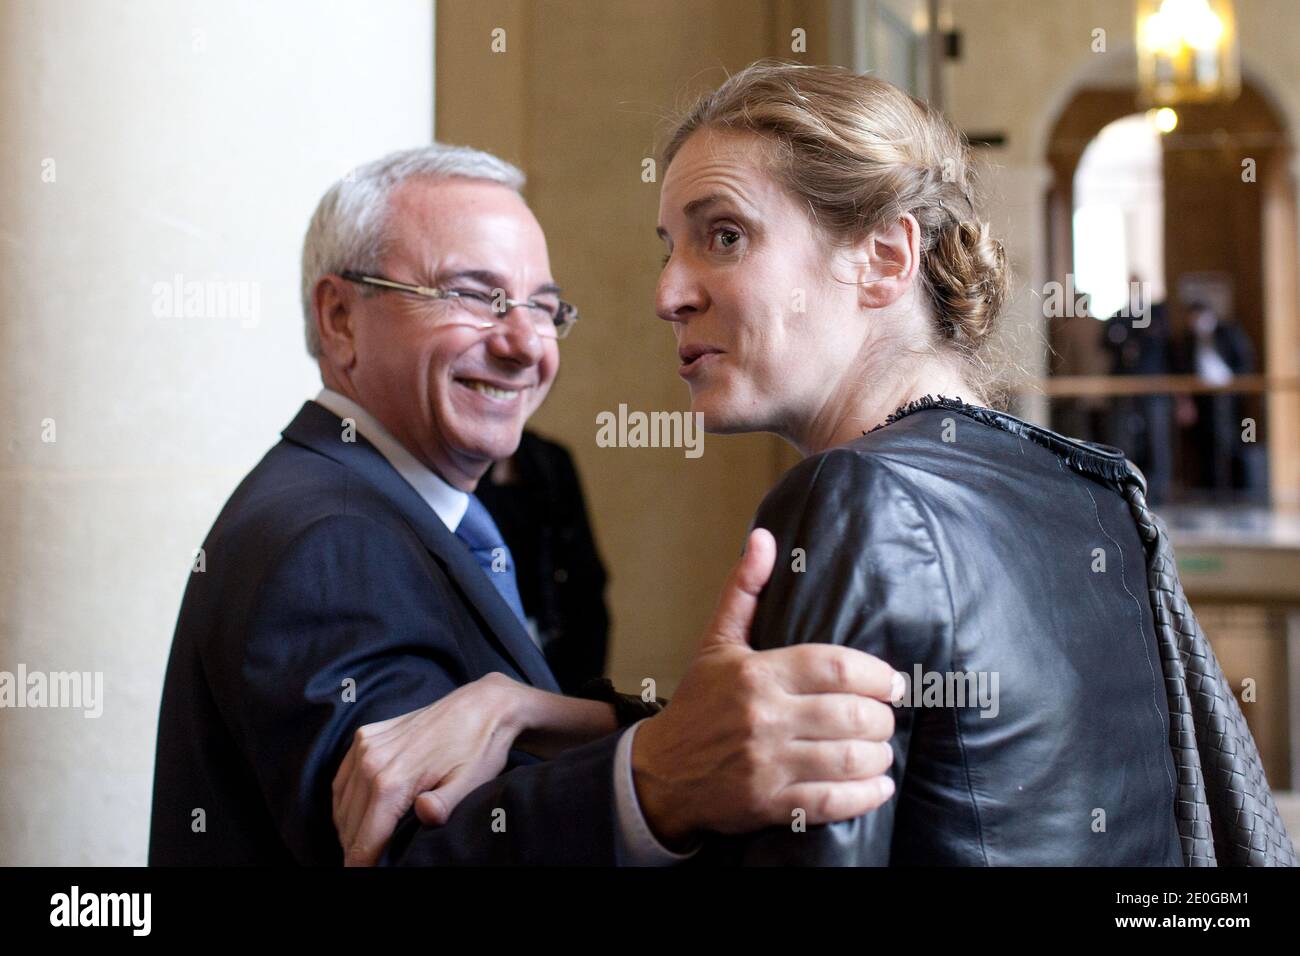 French newly-elected UMP Jean Leonetti and Nathalie Kosciusko-Morizet is  pictured at the French national assembly in Paris, France on June 19, 2012.  Photo by Stephane Lemouton/ABACAPRESS.COM Stock Photo - Alamy